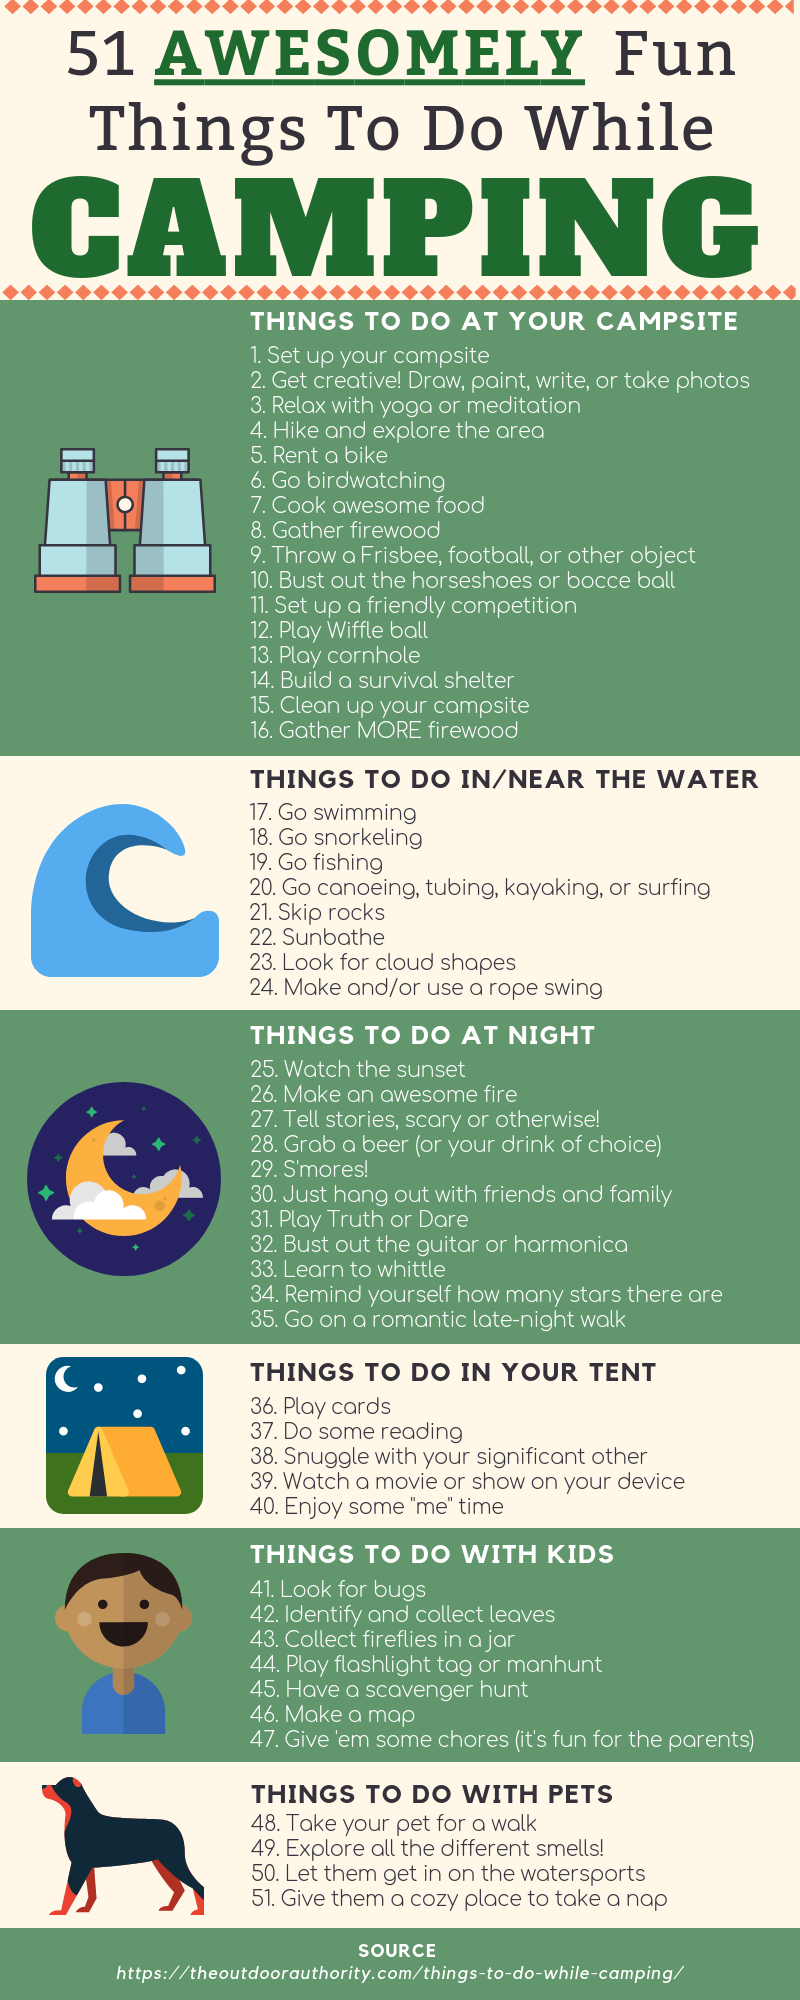 51 Awesomely Fun Things To Do While Camping